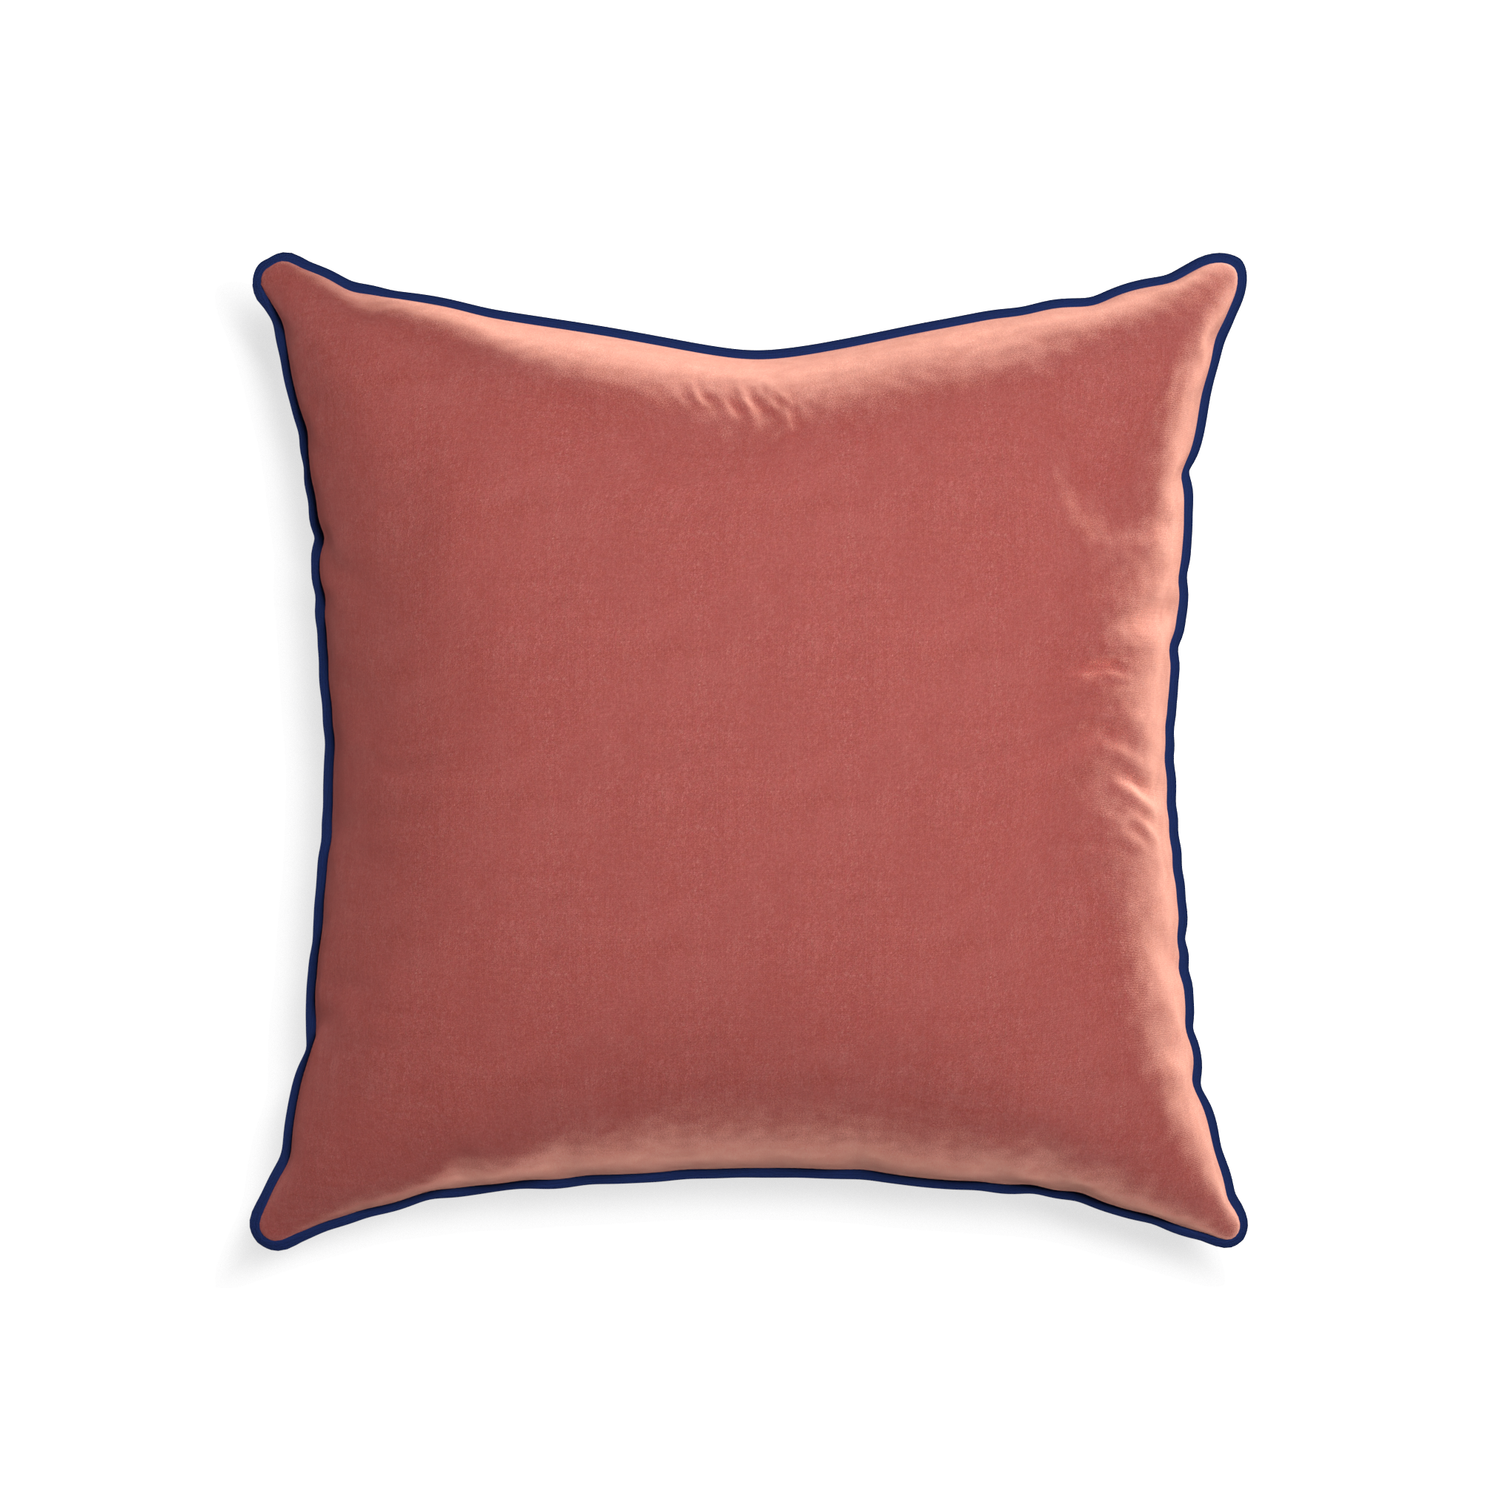 22-square cosmo velvet custom coralpillow with midnight piping on white background